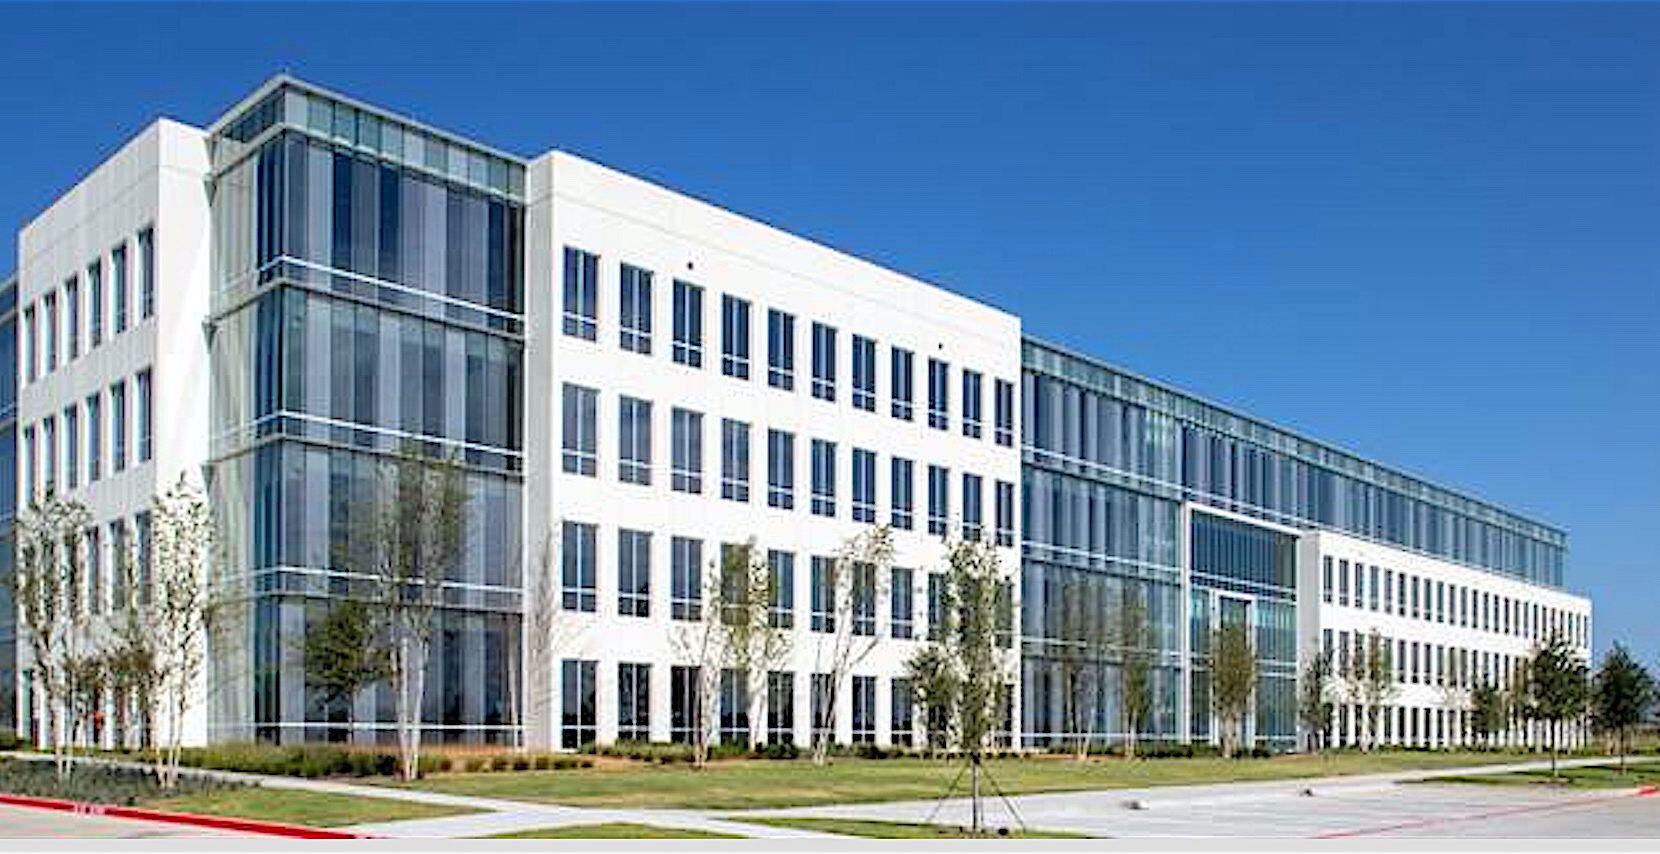 The new office building is near the northwest corner of the Dallas North Tollway and Bush...